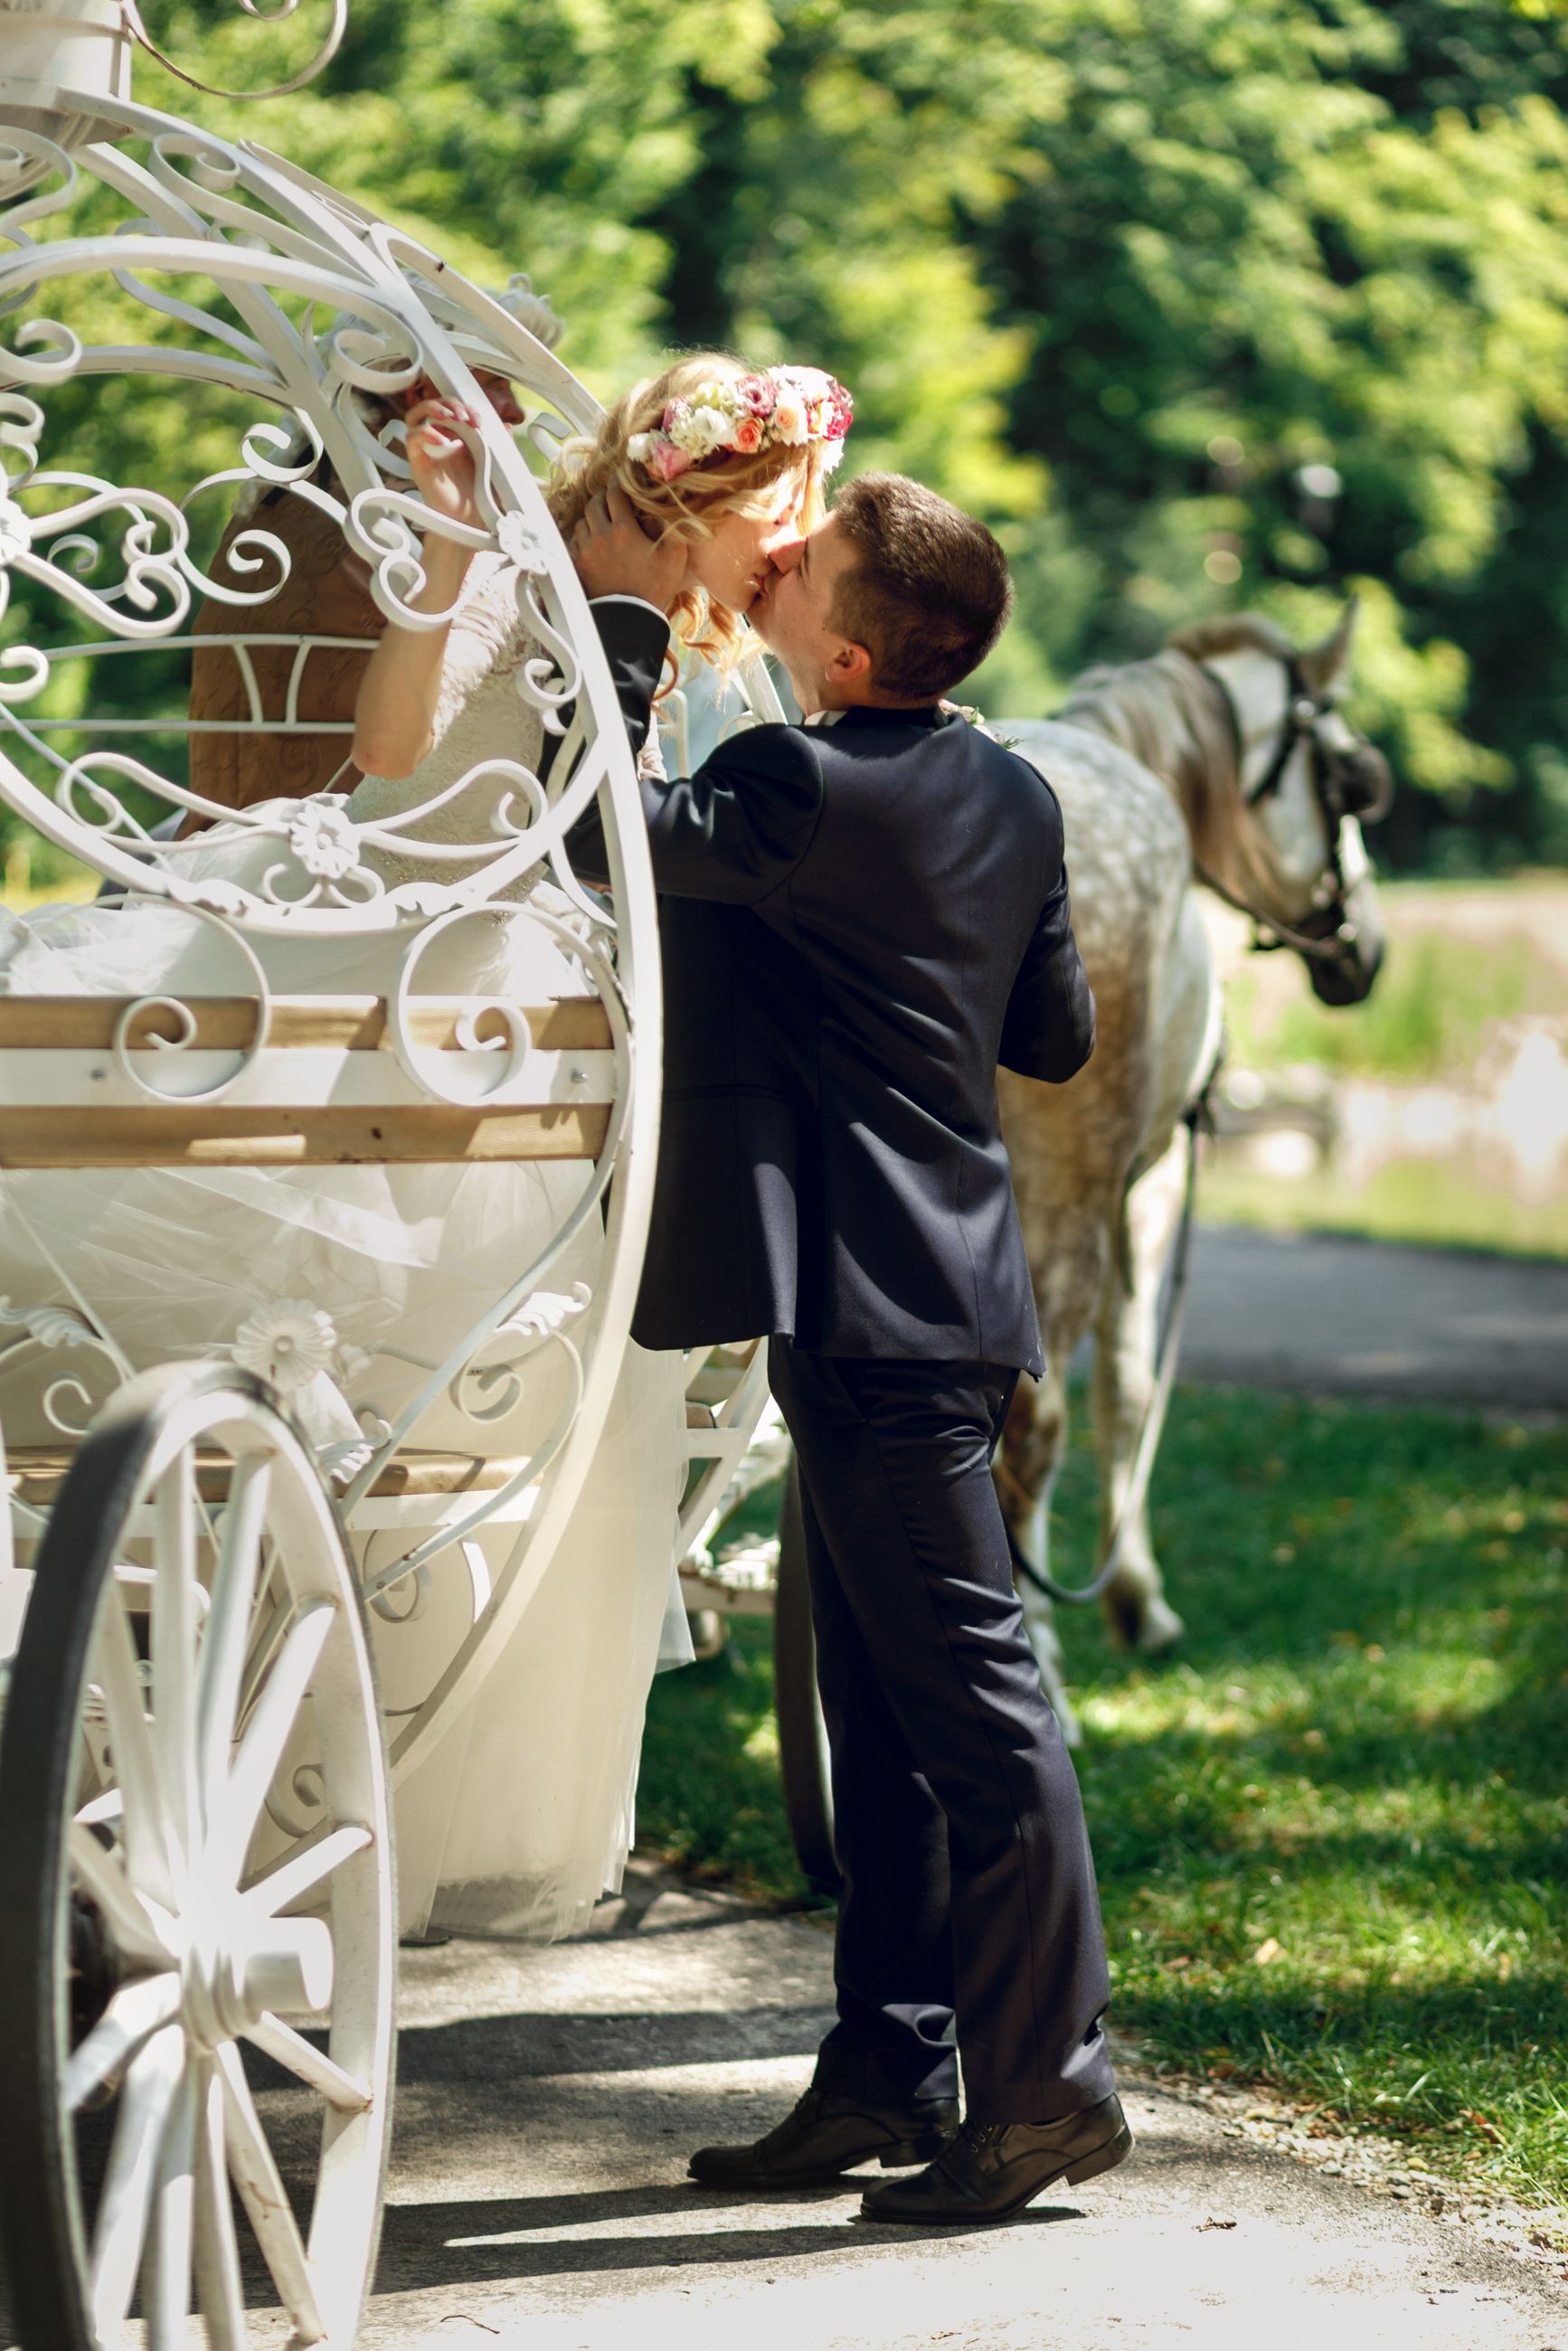 Can Horse Carriages Ever Really Be Romantic? - One Green Planet